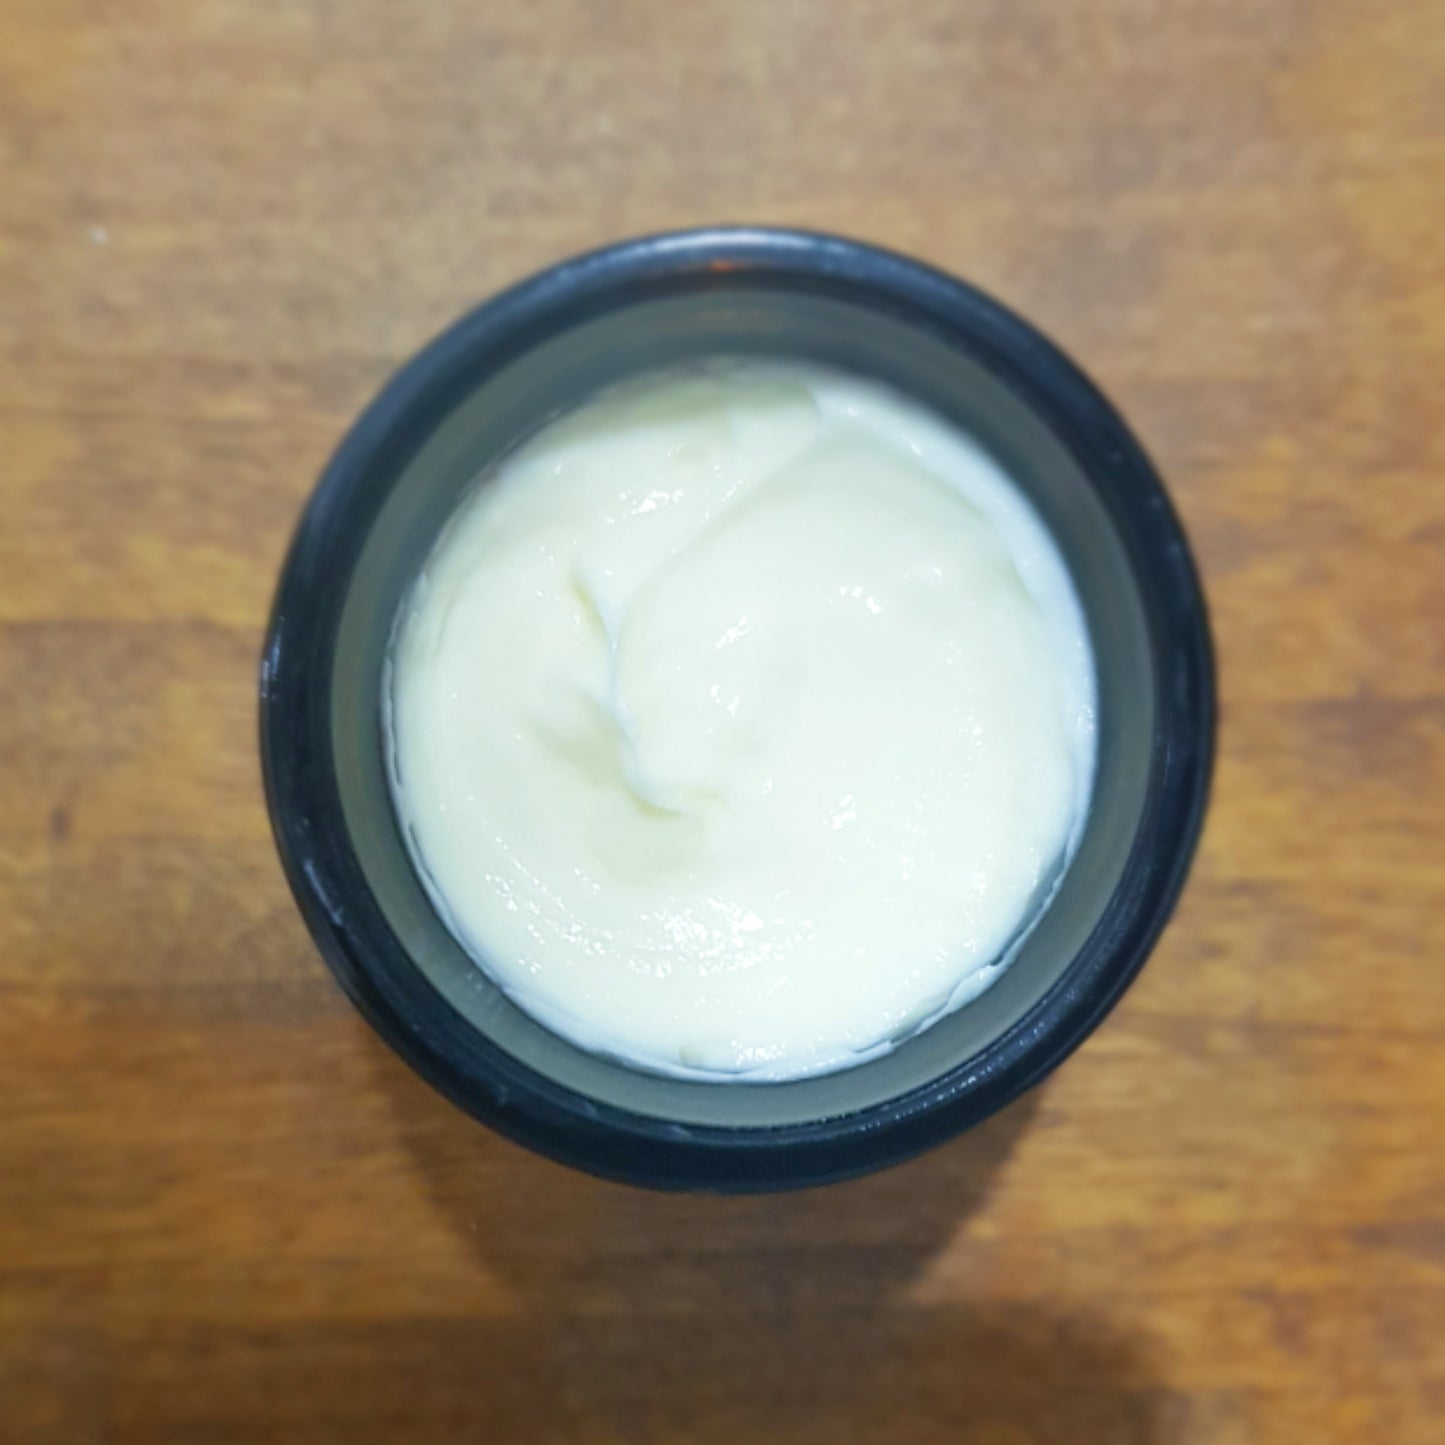 Manly Face Cream